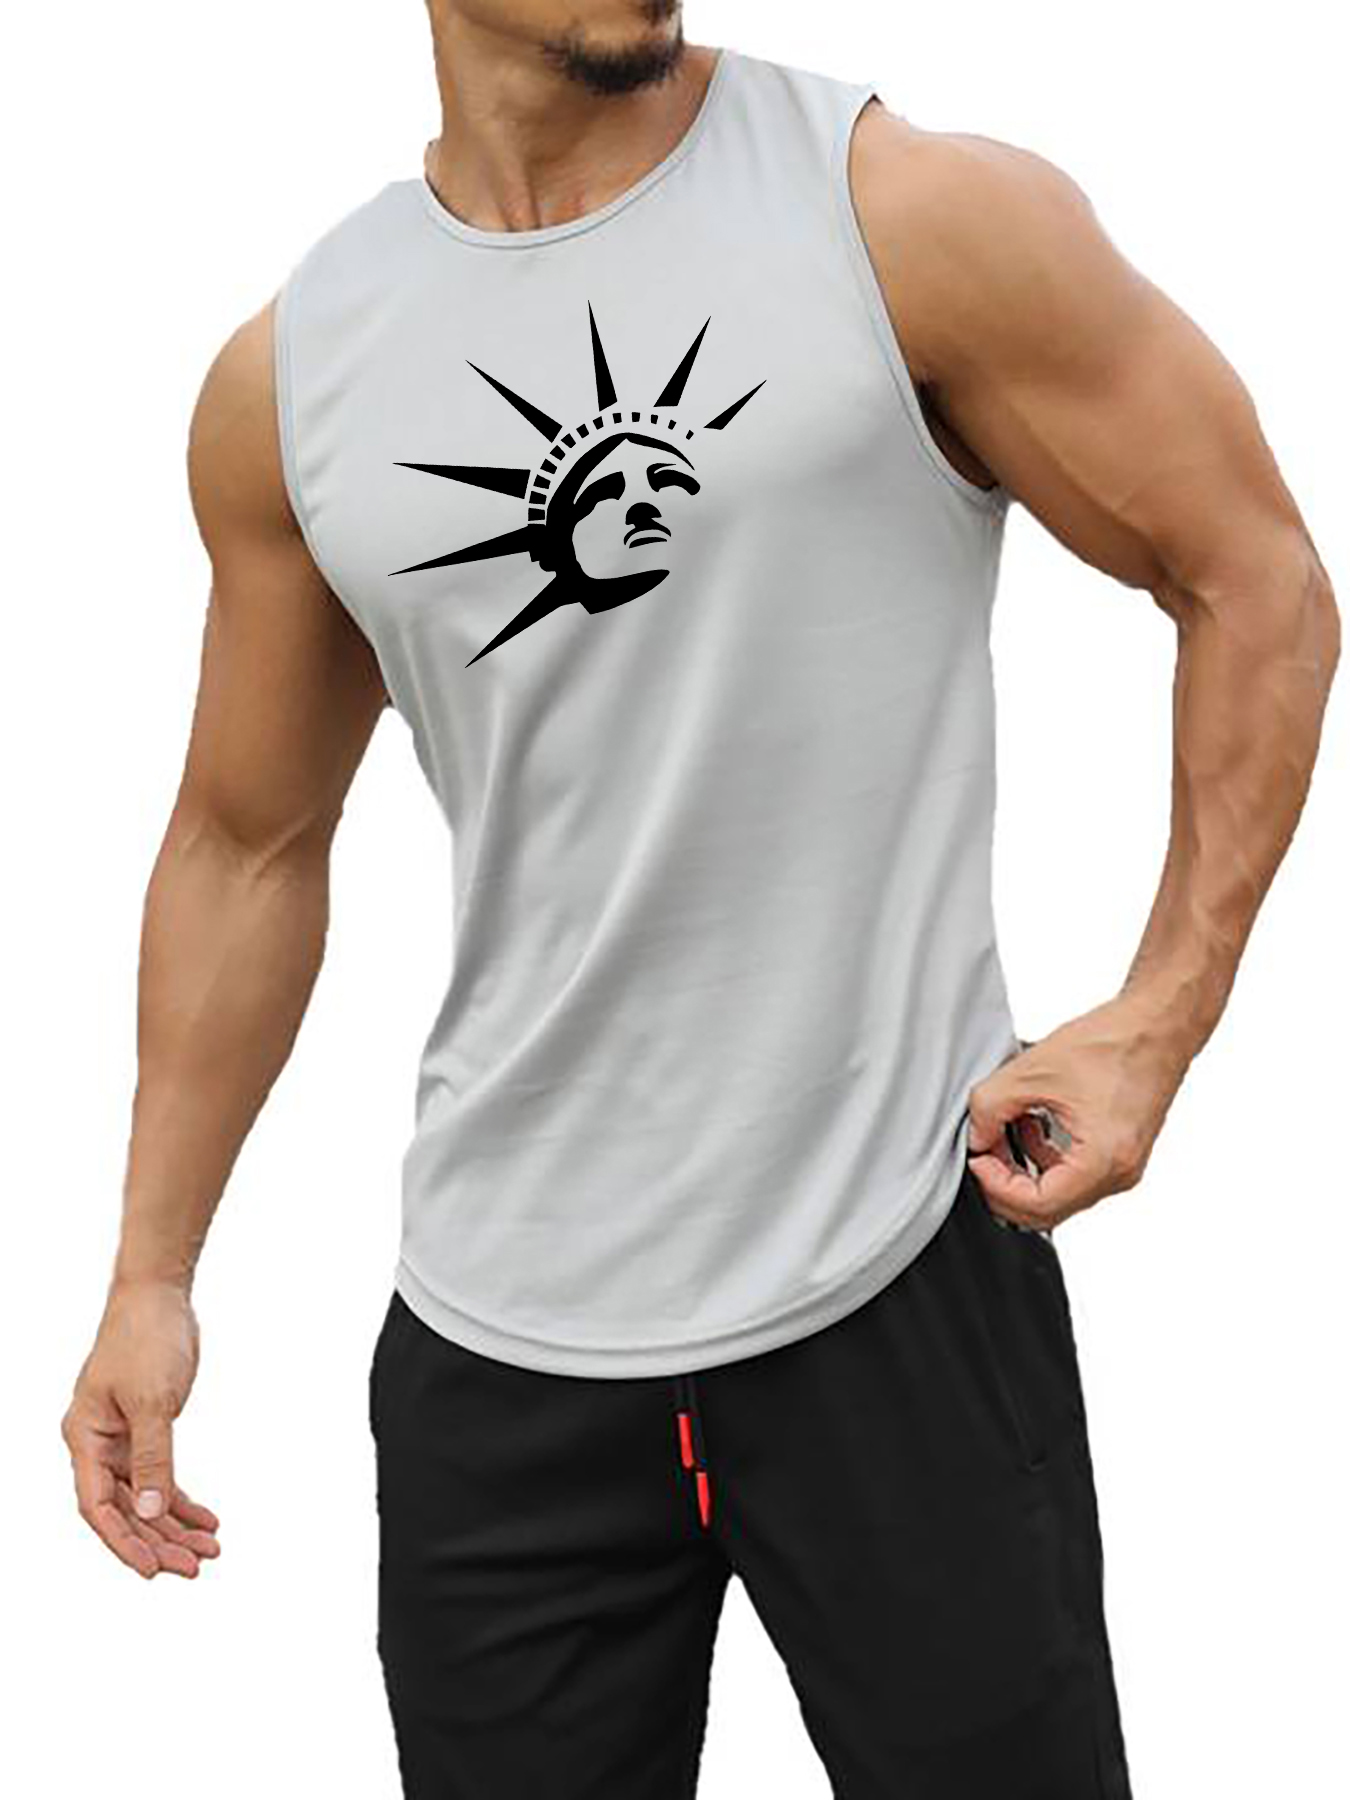 Print Crew Neck Slight Stretch Tank Top, Cami Top, Men's Sports Summer Gym Statue of Liberty Dry Fit Sleeveless Active Workout The Bodybuilding and